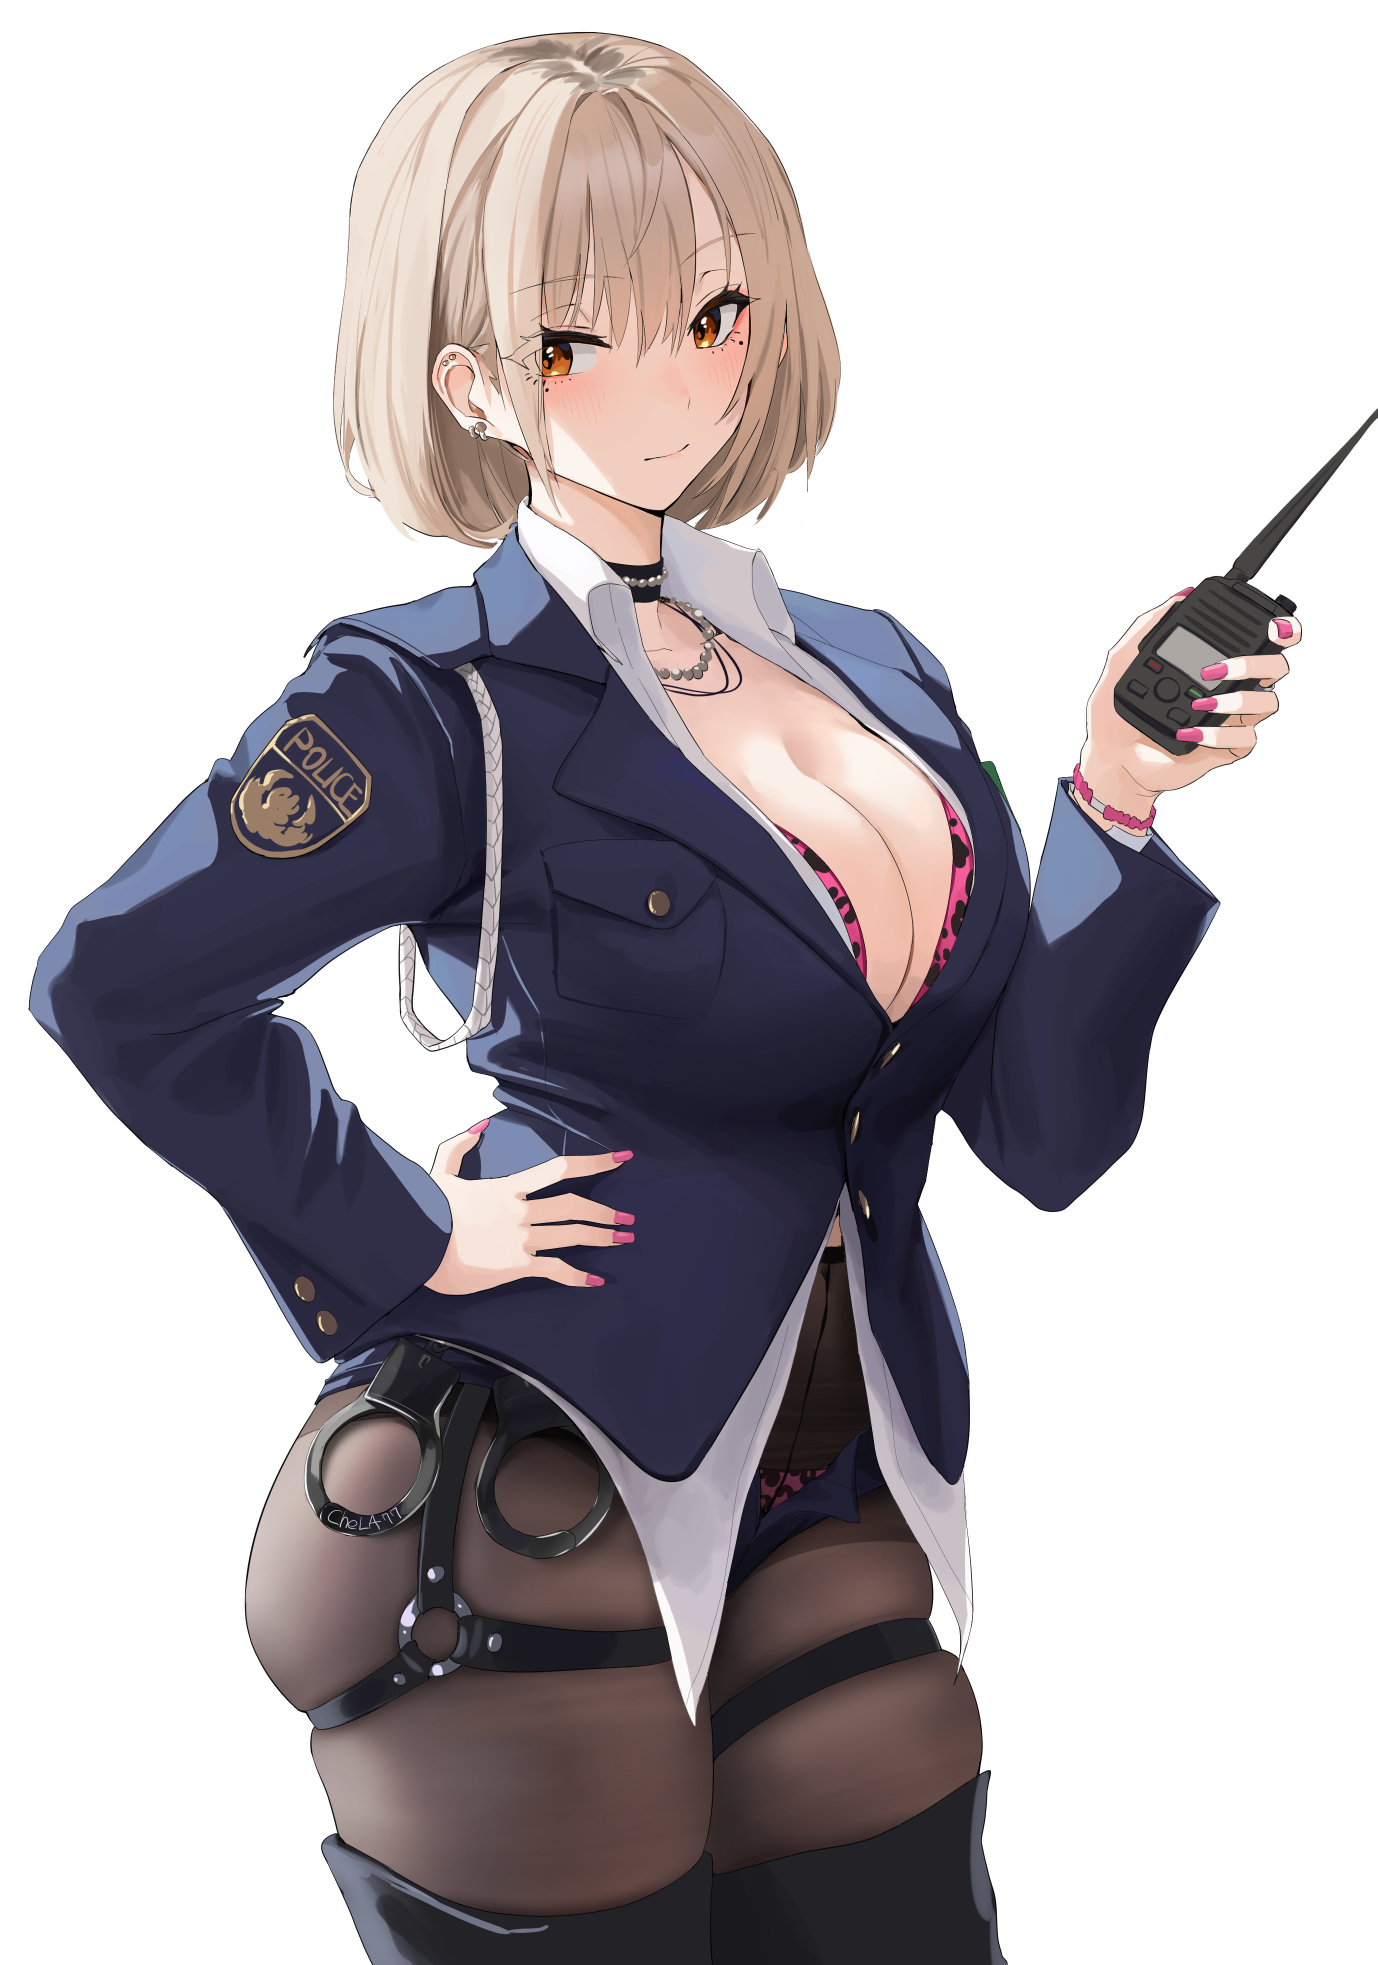 Anime 1378x1965 anime anime girls original characters bra pantyhose short hair painted nails pink nails thigh high boots cleavage hands on hips handcuffs walkie-talkie police police women CheLA necklace pearl necklace moles mole under eye simple background white background portrait display blushing big boobs open shirt uniform looking at viewer minimalism open shorts